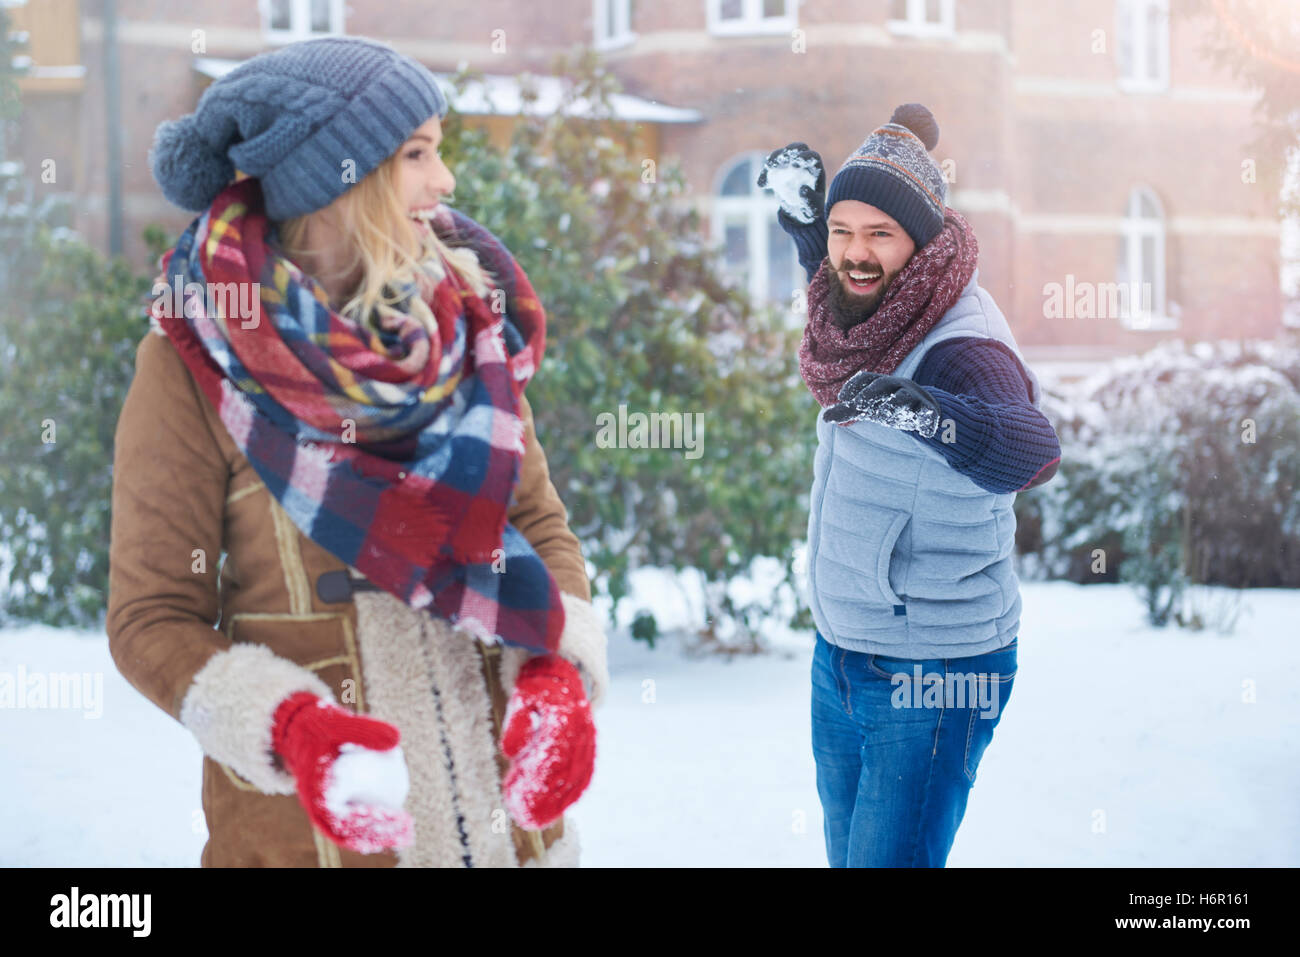 Laughing together in the winter Stock Photo